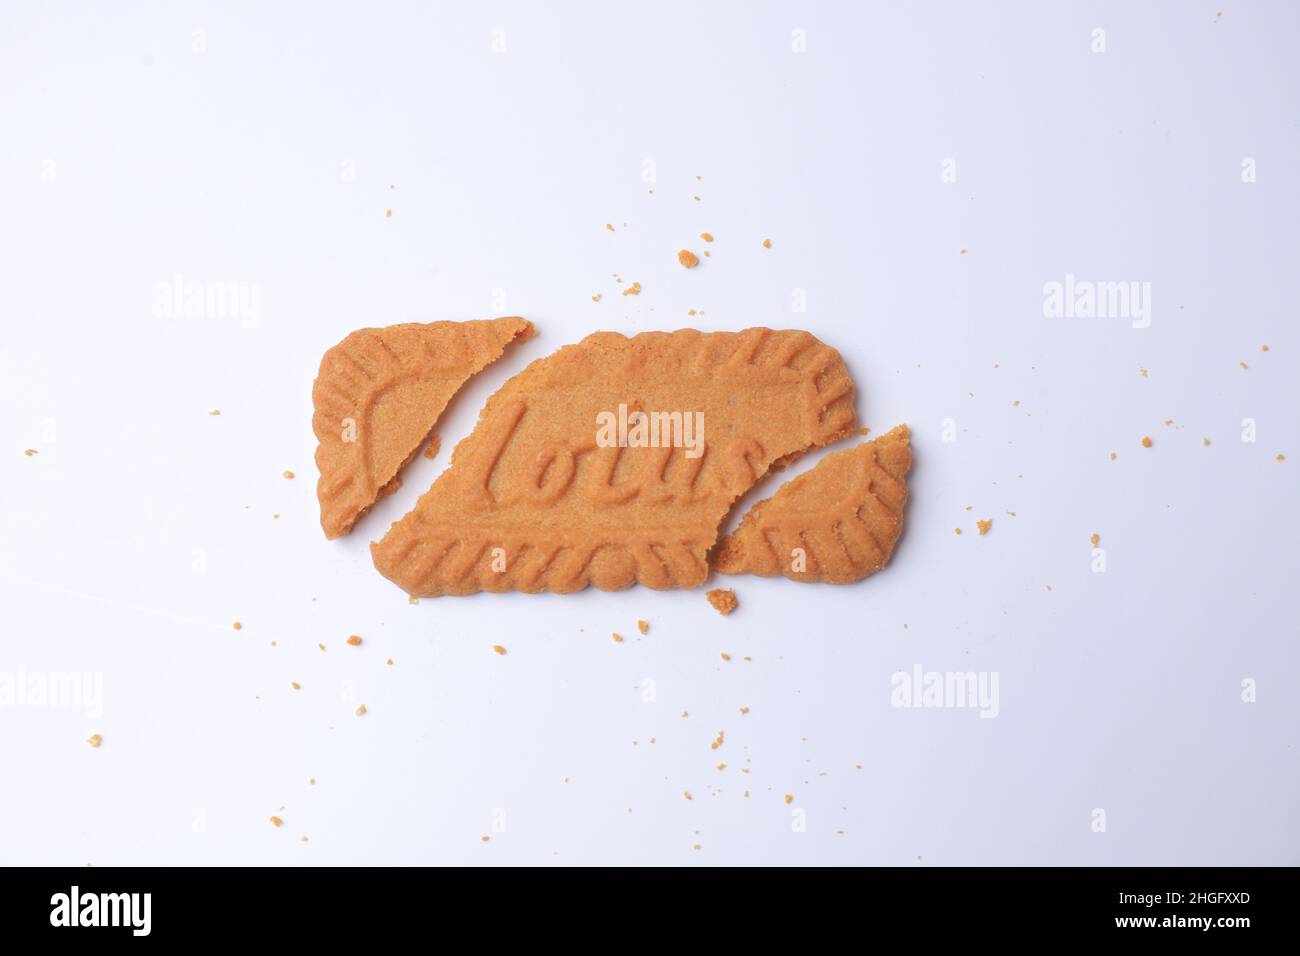 SIDOARJO - EAST JAVA, January 16, 2022: Lotus Biscoff is a caramelized biscuit, smooth and crunchy textures on white background. Copy space. Stock Photo